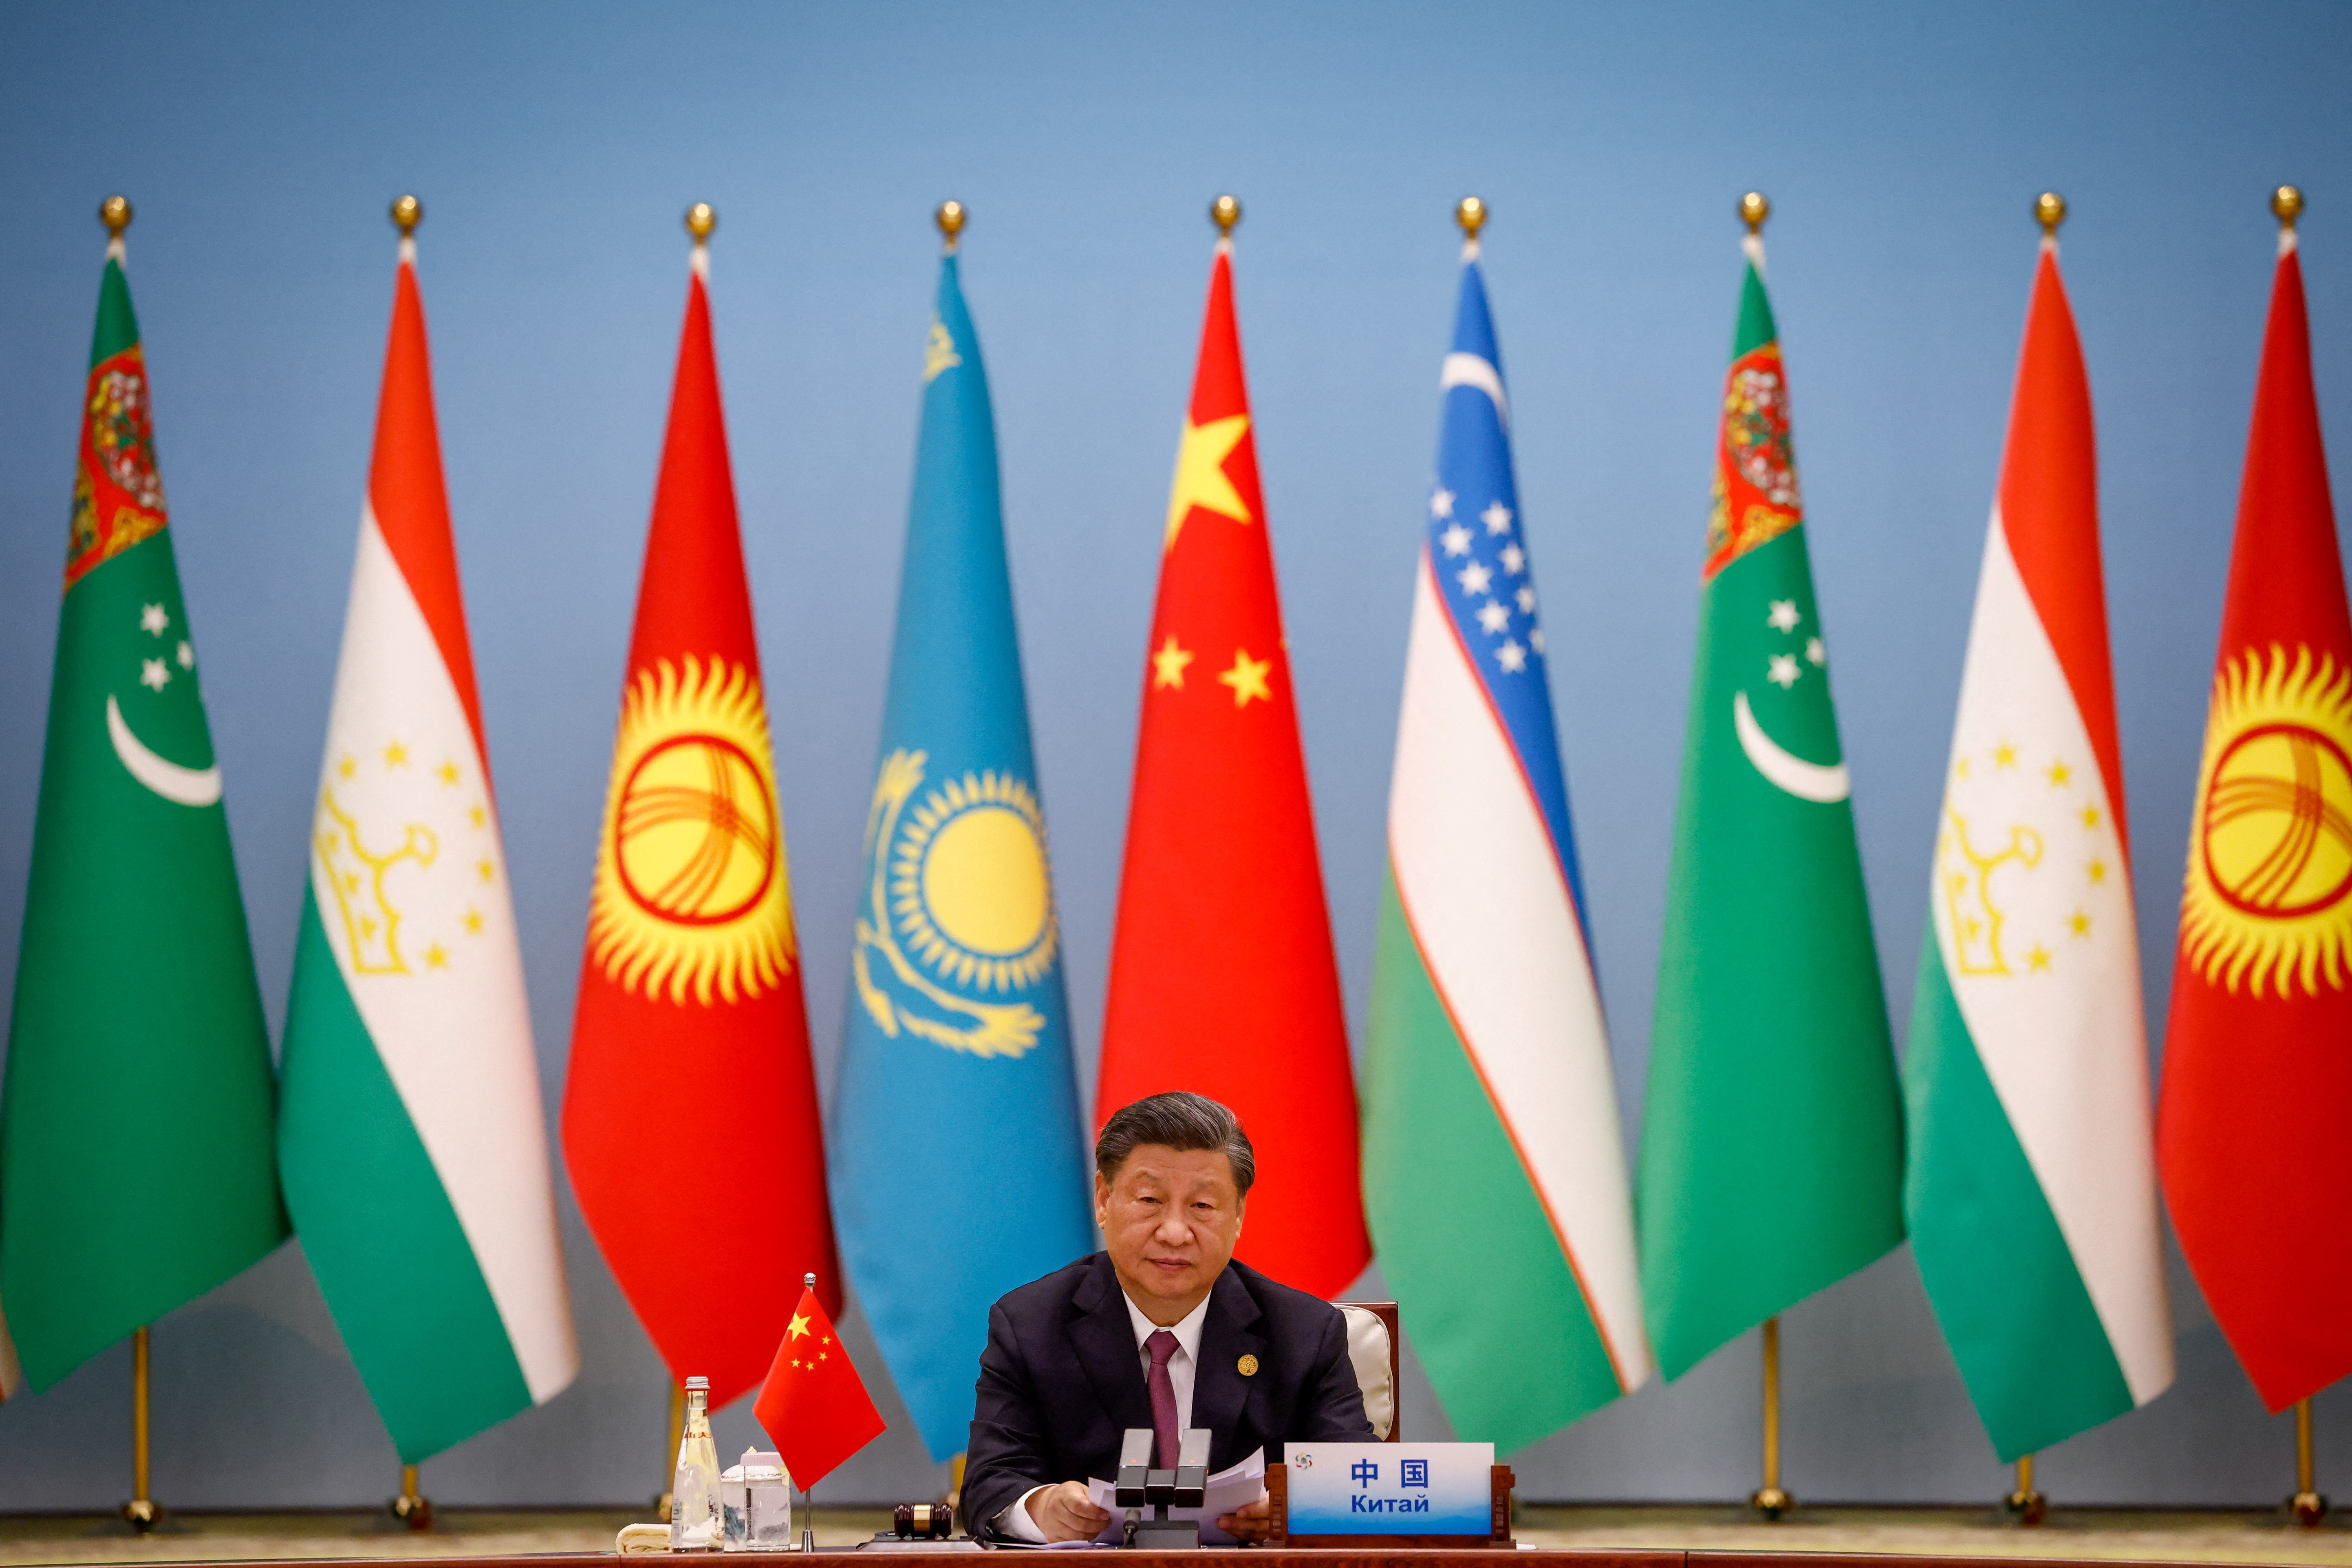 China-Central Asia Summit in Xi'an